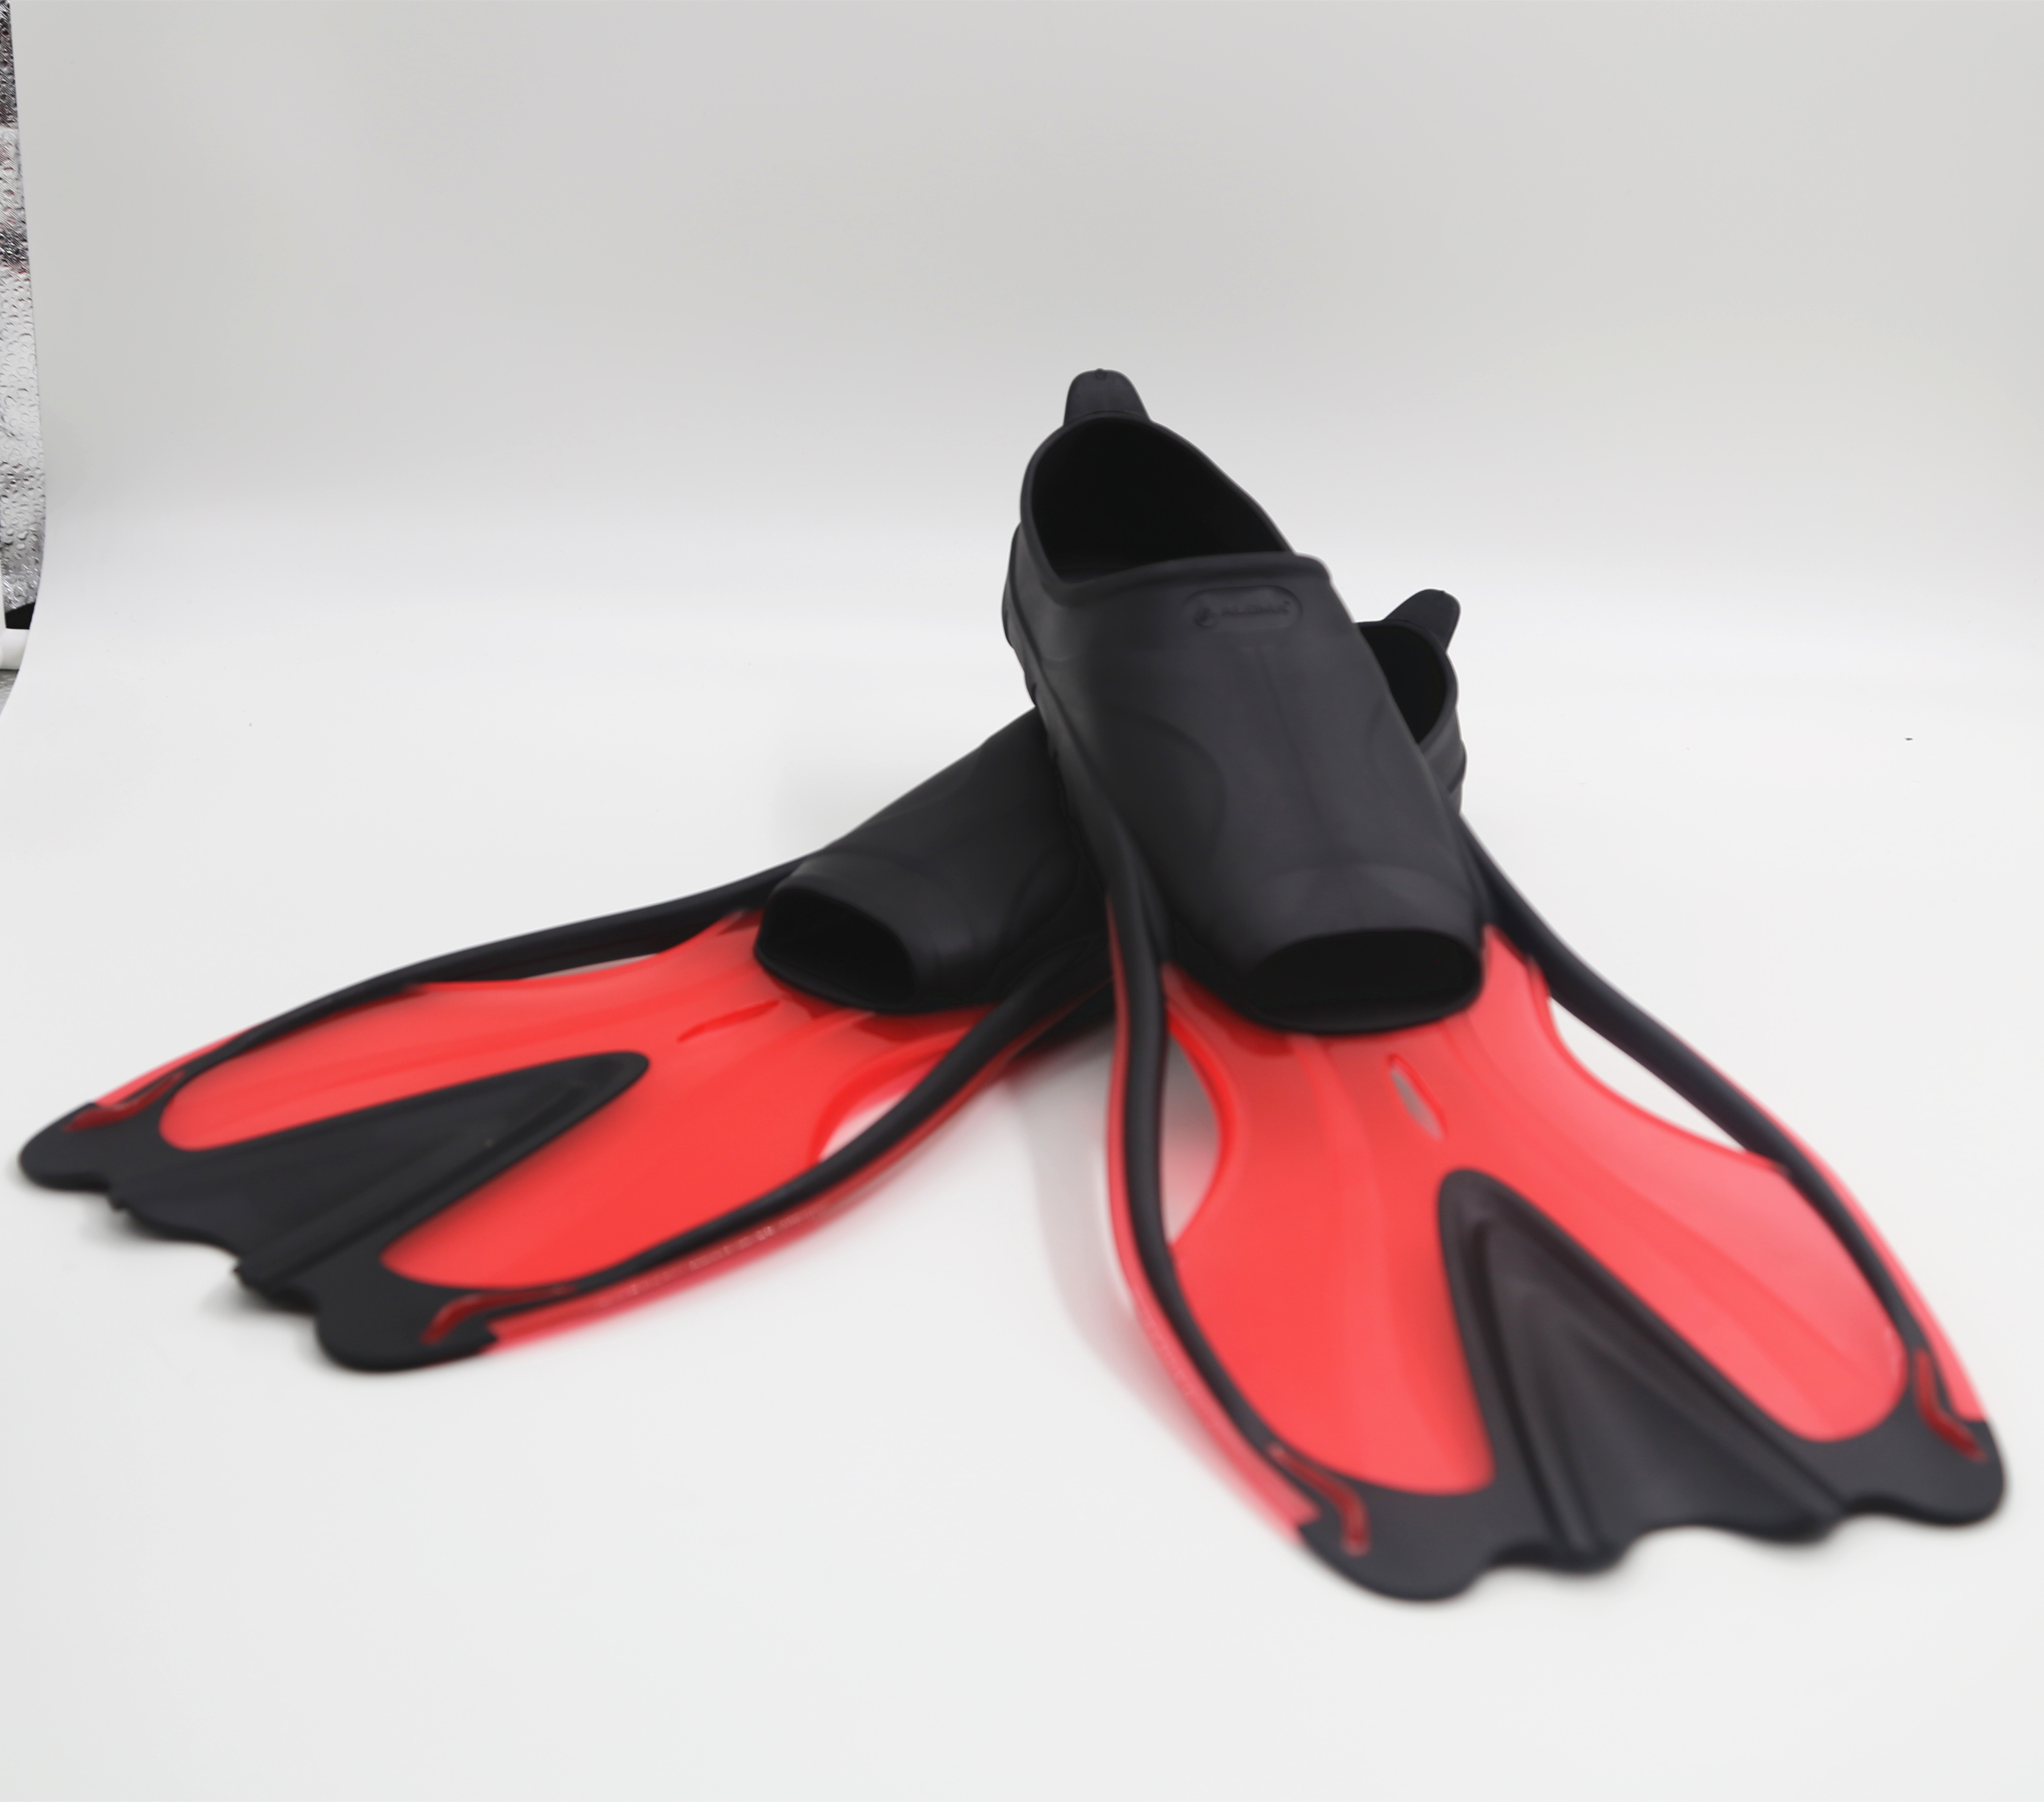 Diving-Fins-Swim-Footsteps-Silicone-Snorkeling-Diving-Swimming-Sports-Equipment-Long-Fins-1138058-3